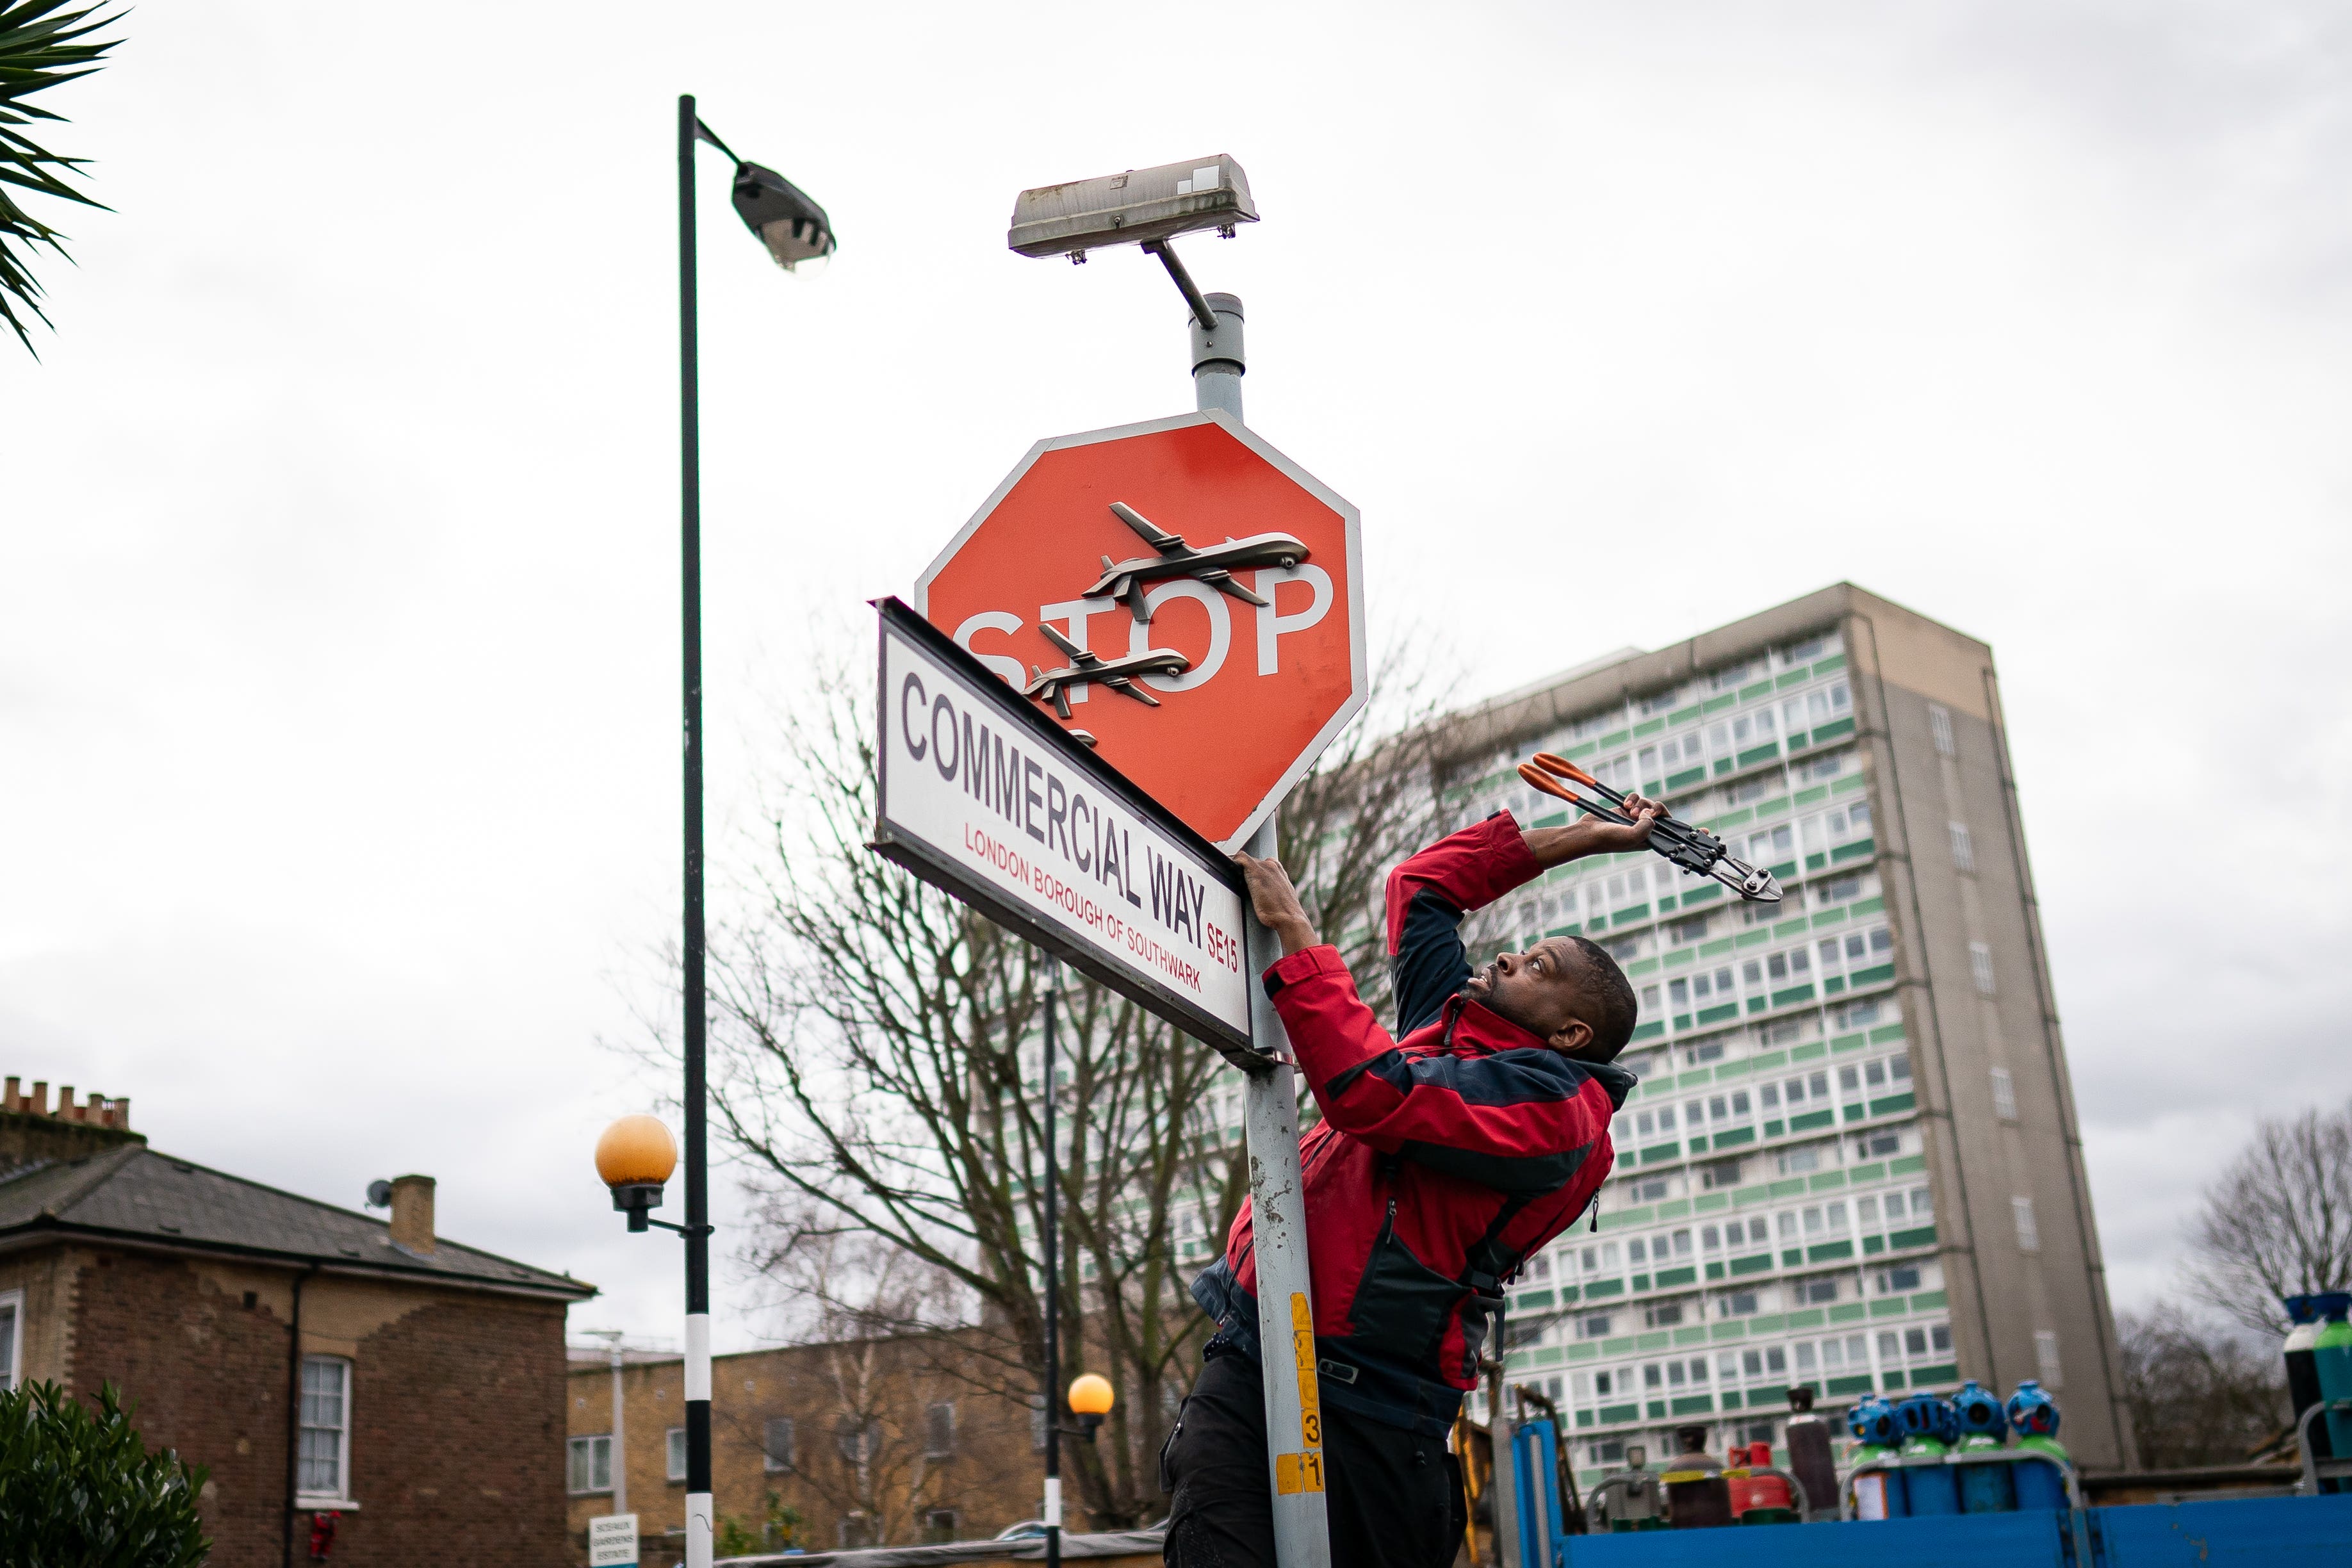 A man removes a piece of art by Banksy at the intersection of Southampton Way and Commercial Way in Peckham